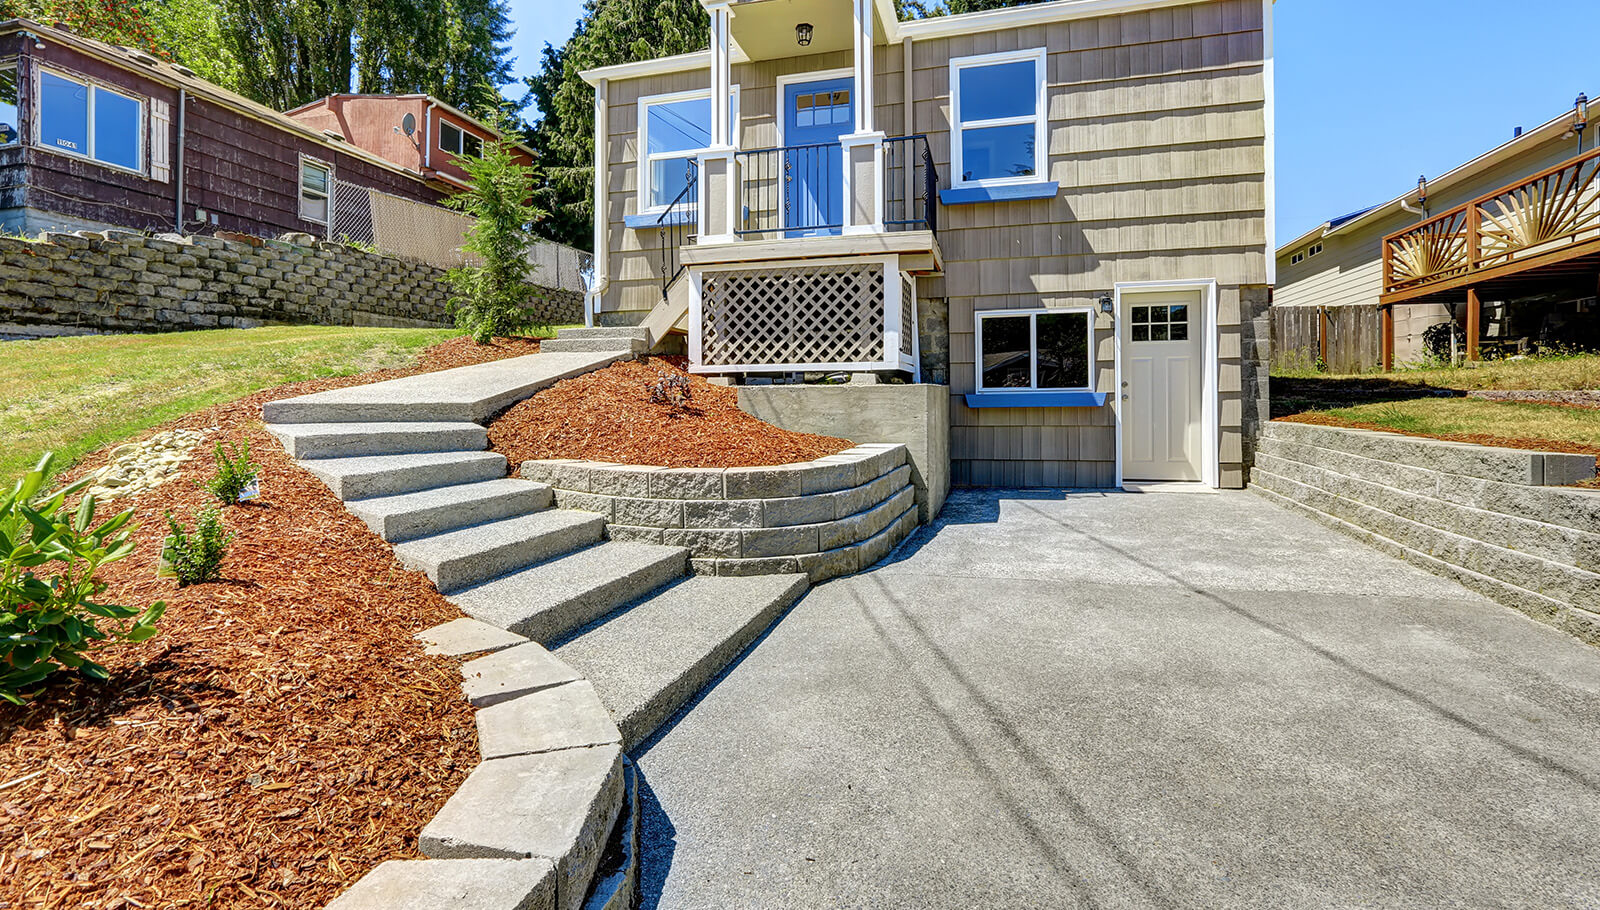 Residential concrete driveway and sidewalk